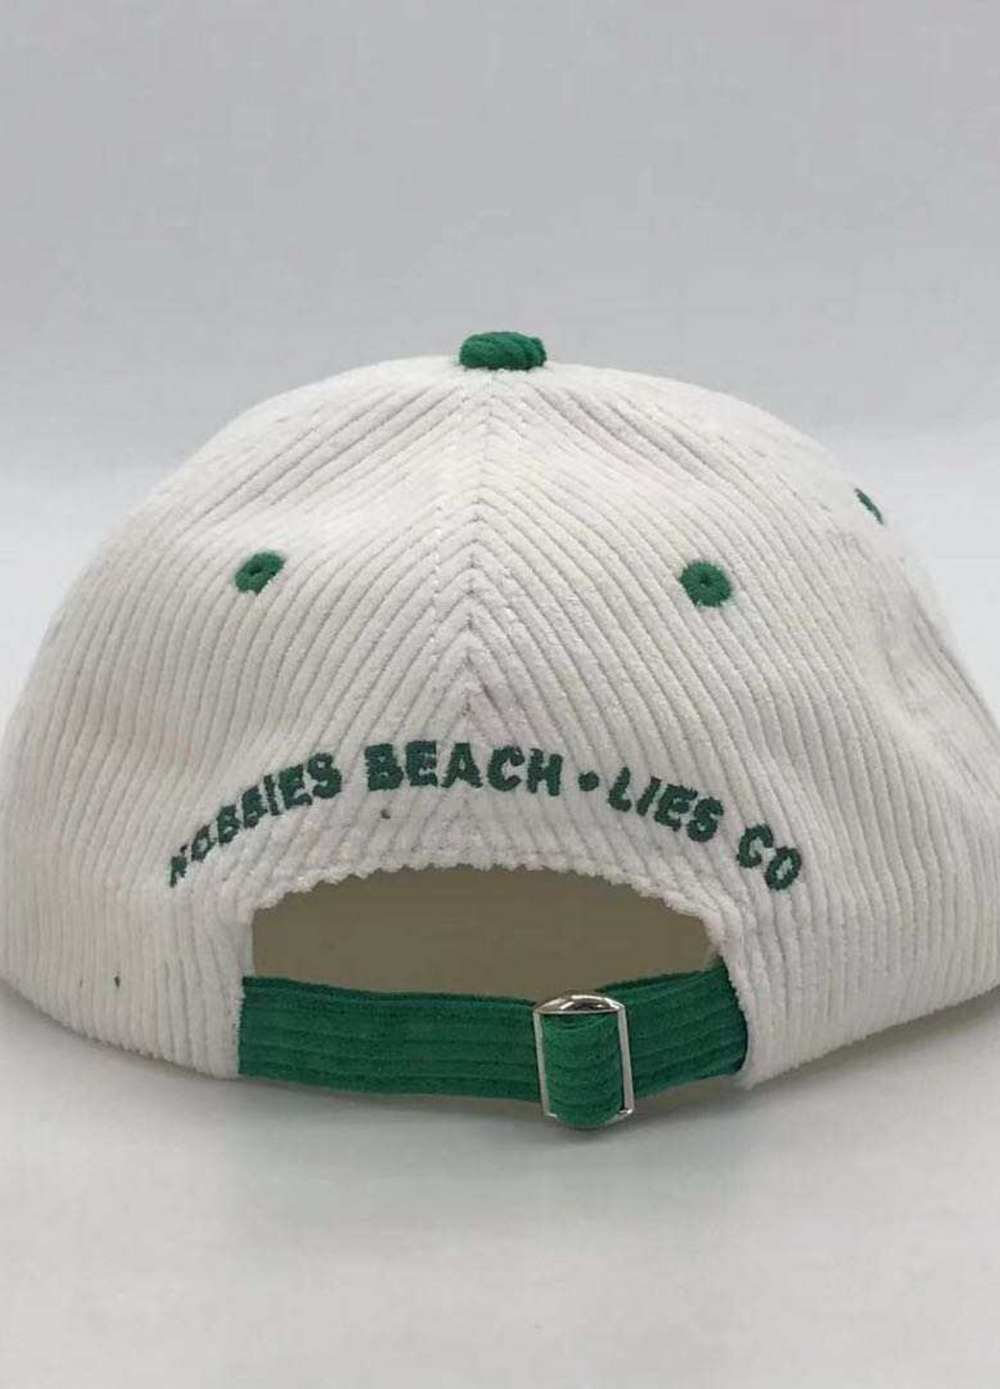 Nobby's Beach Hat - Lies Collective